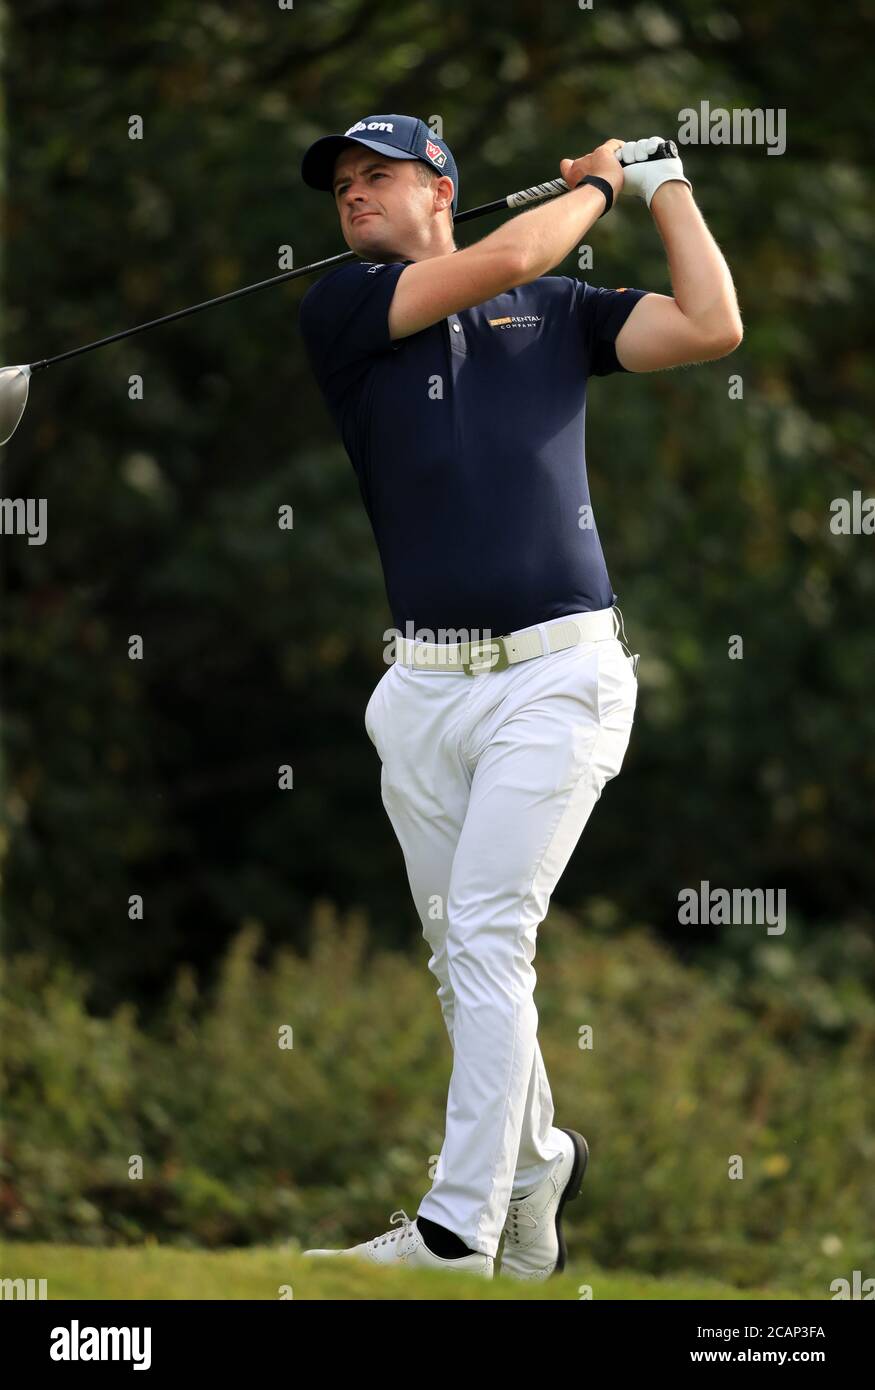 Italy's Andrea Pavan during day three of the English Championship at Hanbury Manor Marriott Hotel and Country Club, Hertfordshire. Saturday August 8, 2020. See PA story Golf Ware. Photo credit should read: Adam Davy/PA Wire. RESTRICTIONS: Editorial Use, No Commercial Use. Stock Photo